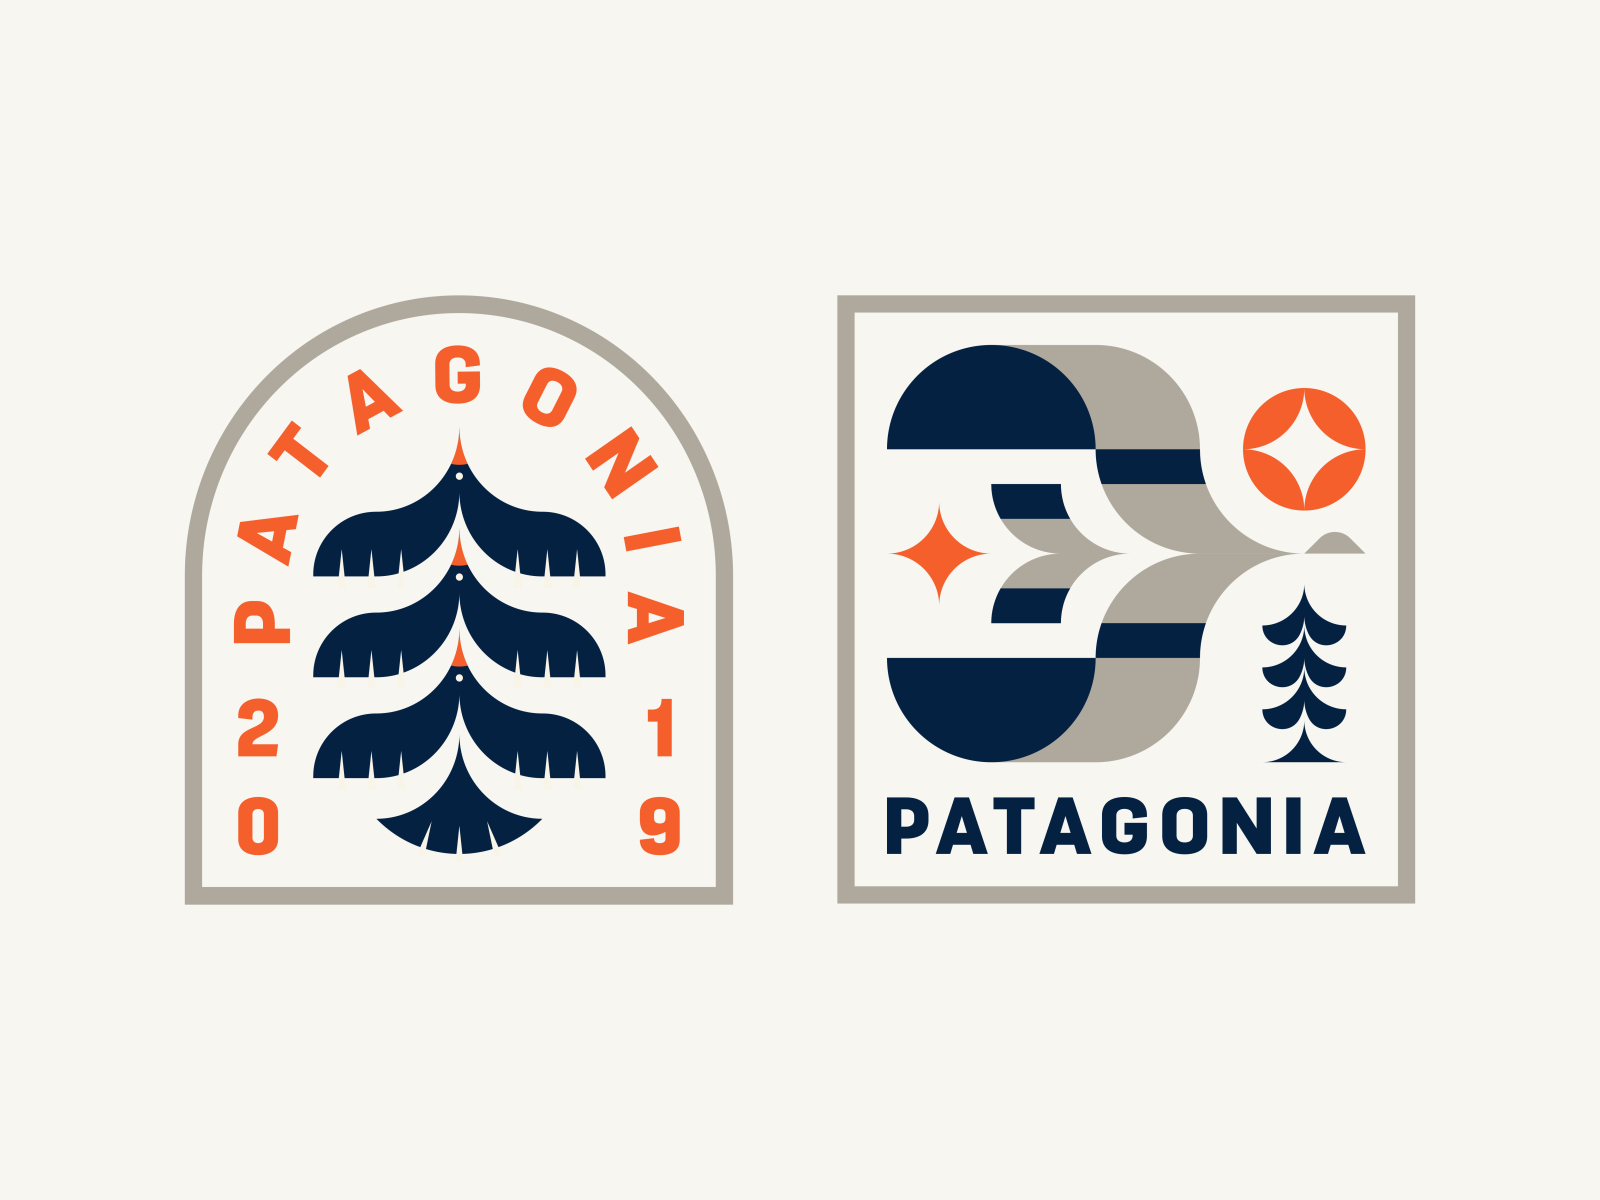 Patagonia Badges by Patrick Moriarty on Dribbble